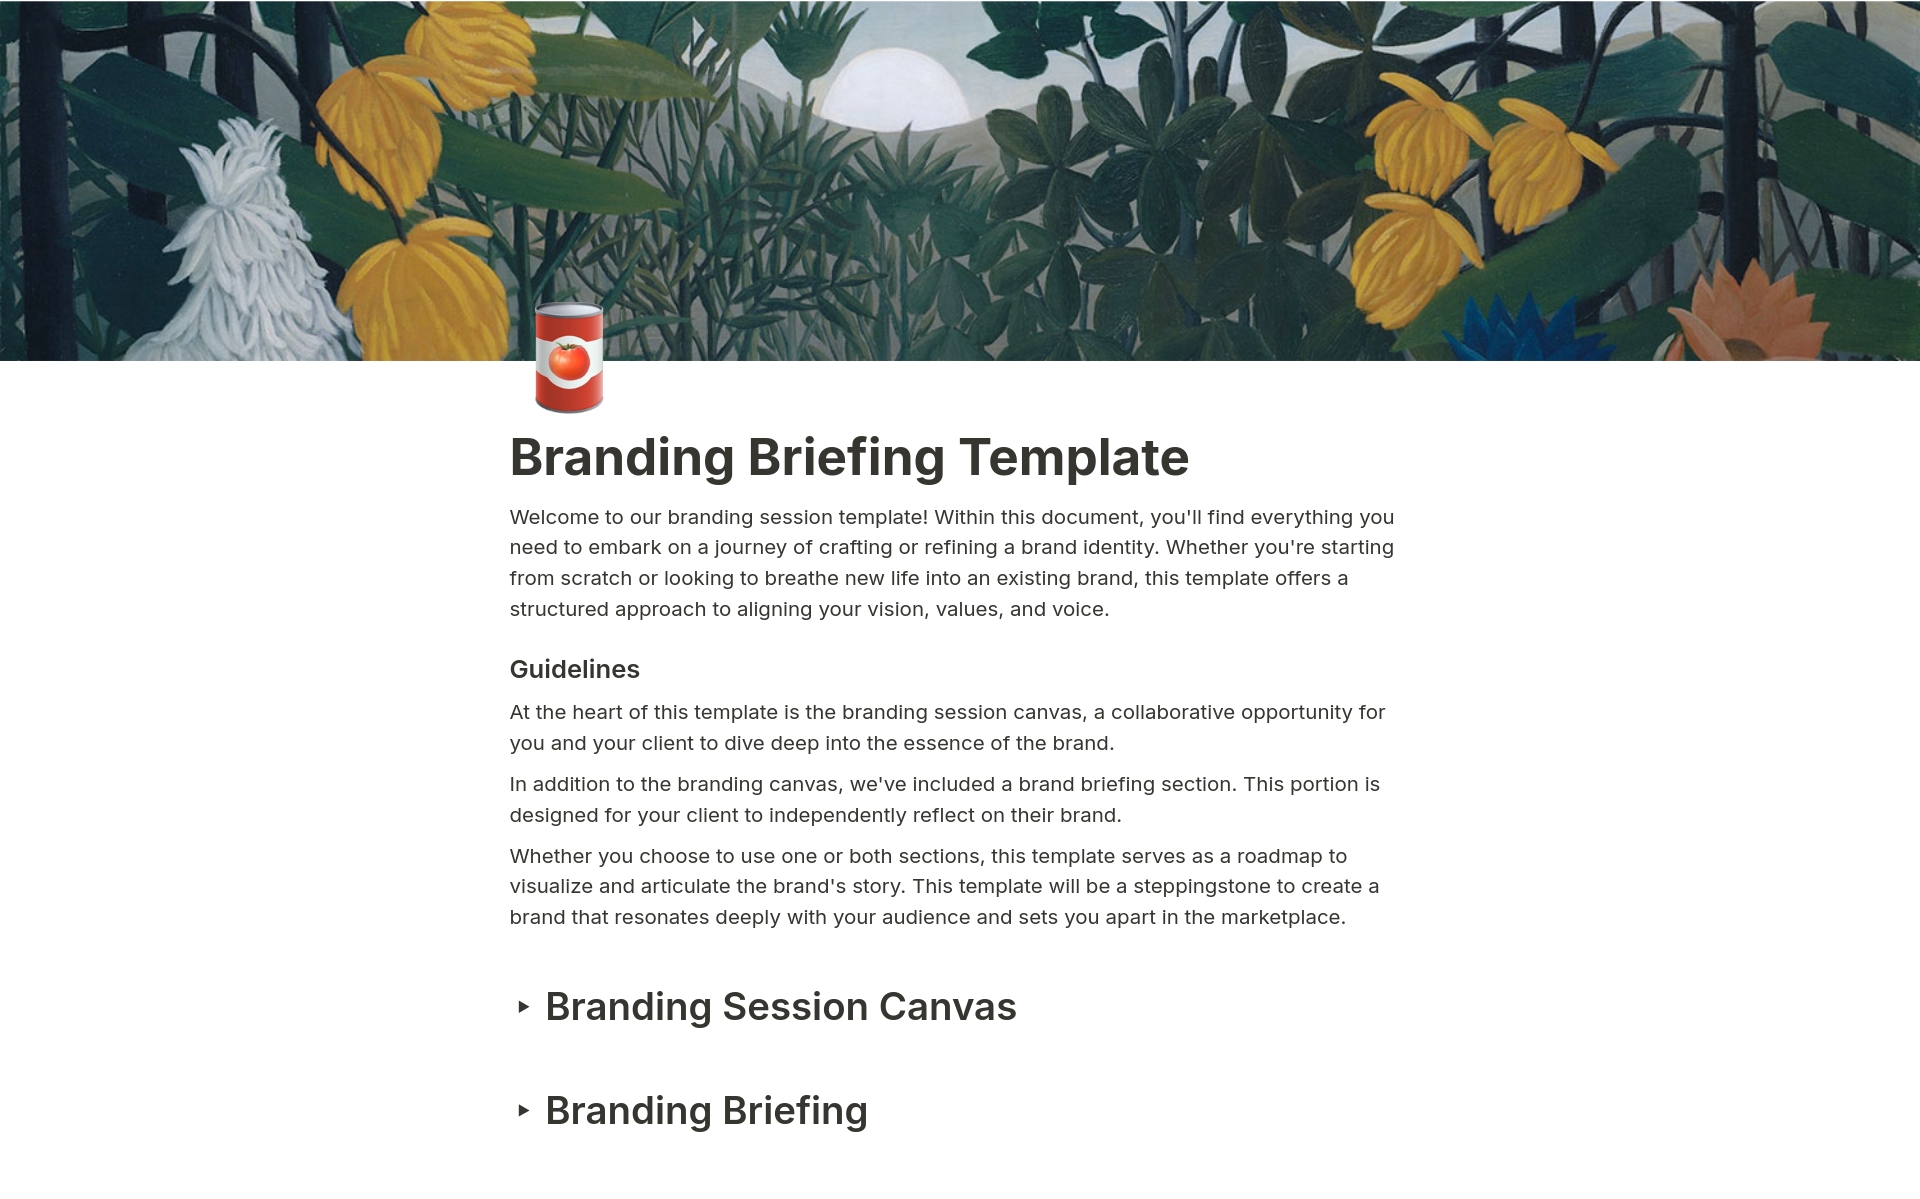 Within this document, you'll find everything you need to embark on a journey of crafting or refining a brand identity. This template offers a structured approach to aligning your vision, values, and voice.